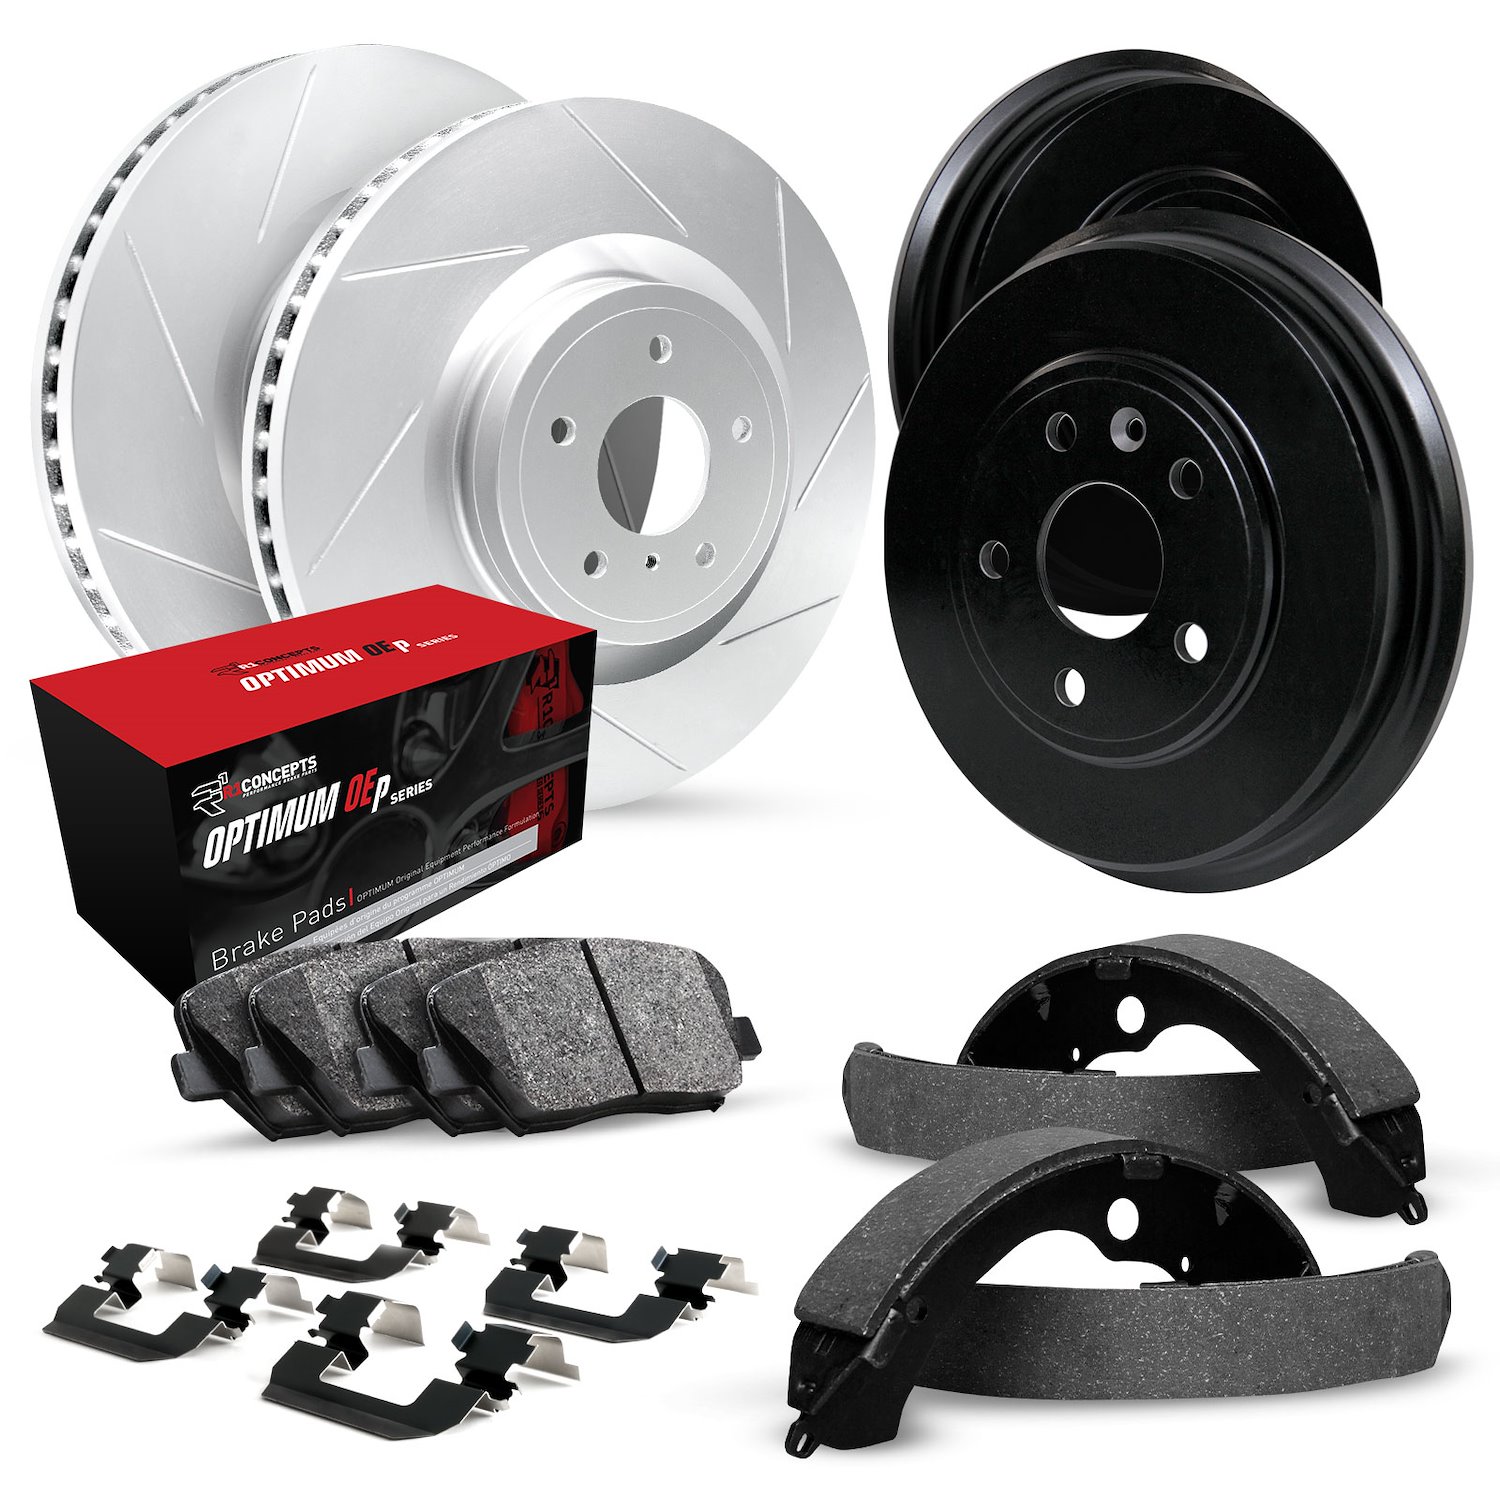 GEO-Carbon Slotted Brake Rotor & Drum Set w/Optimum OE Pads, Shoes, & Hardware, 1991-1993 GM, Position: Front & Rear